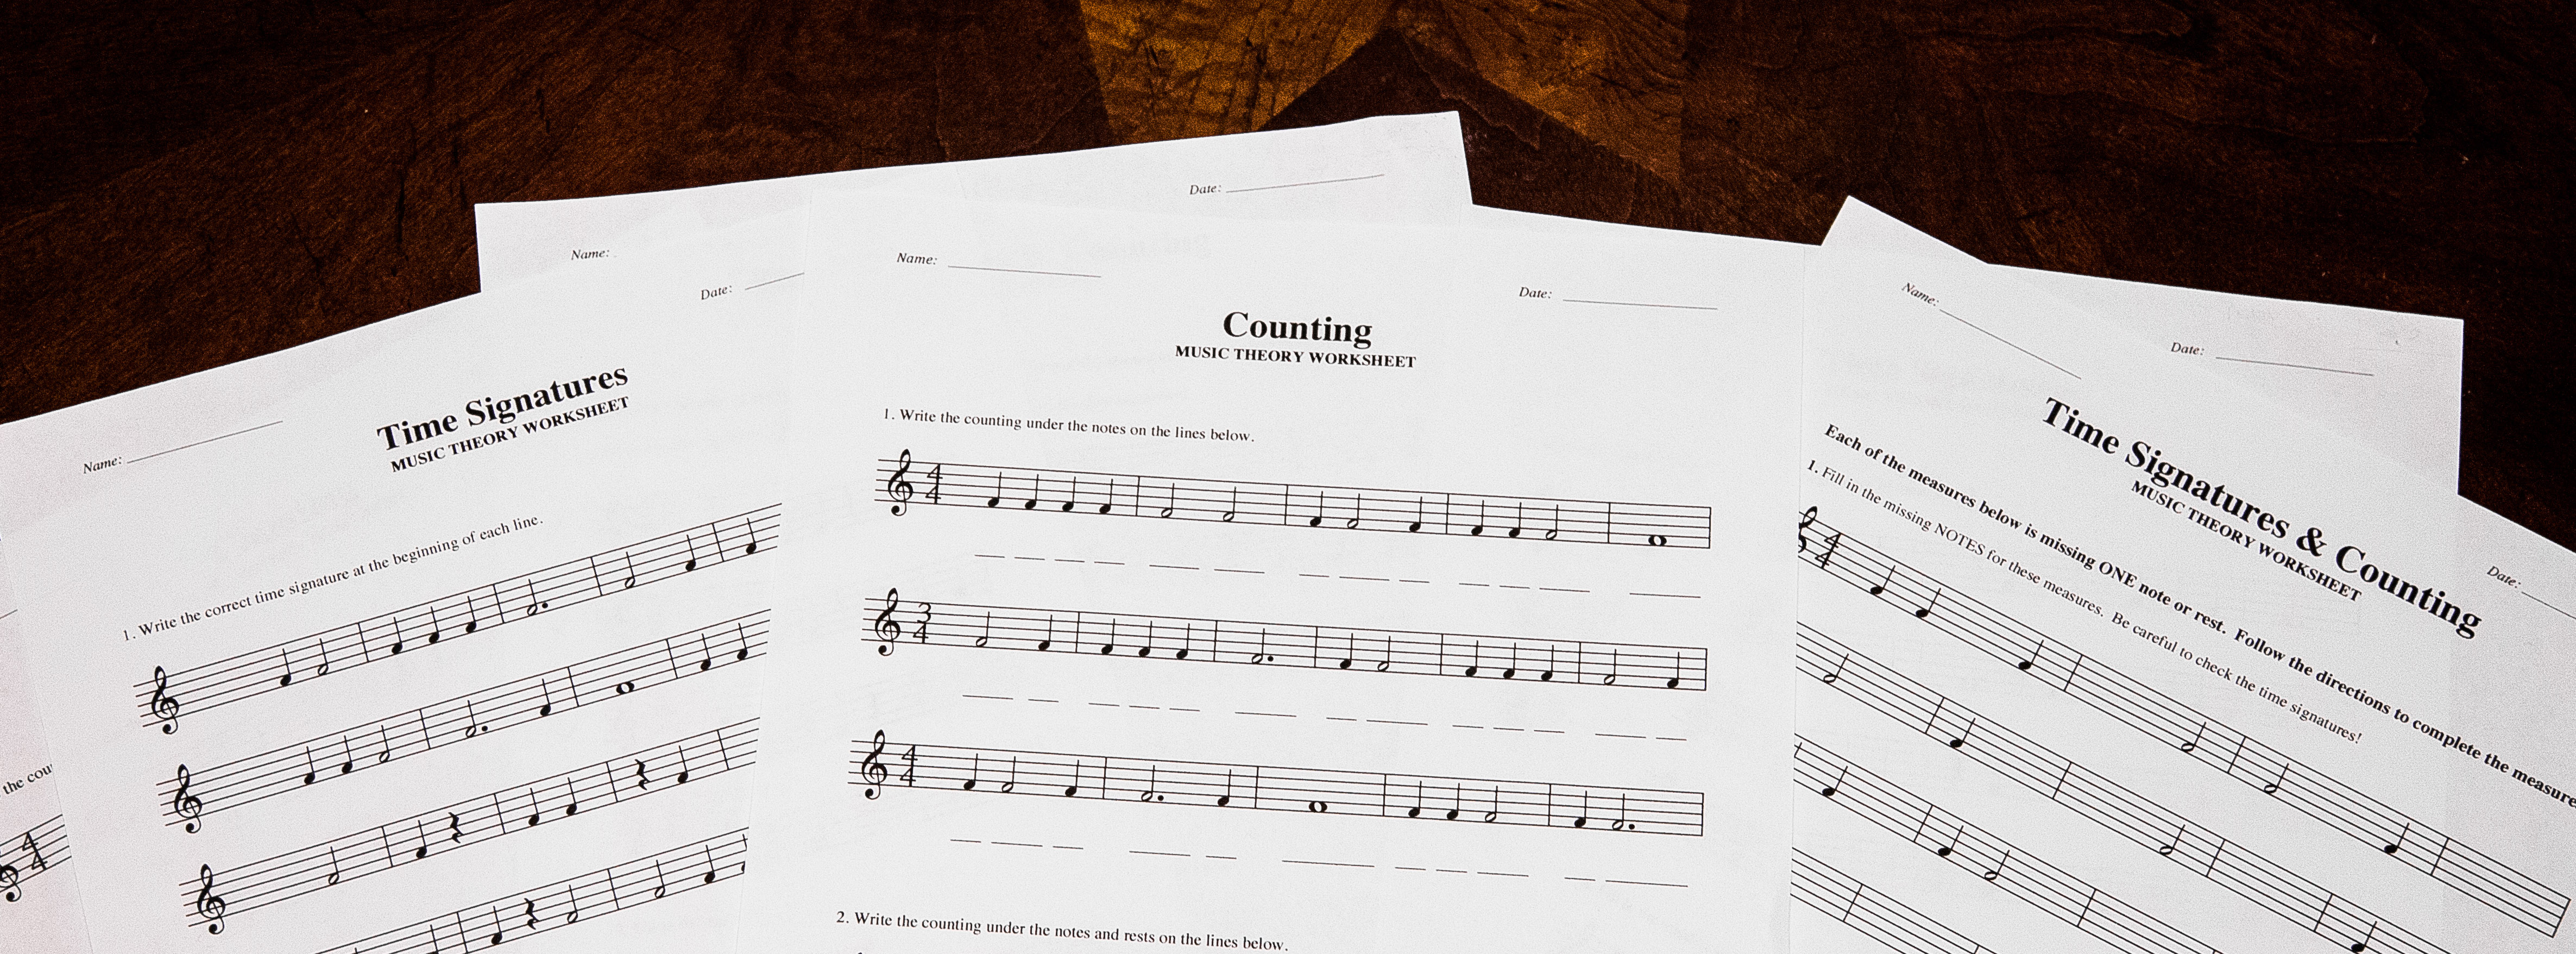 Time Signatures &amp; Counting: Free Printable Theory Worksheets – Lacie | Printable Theory Worksheets